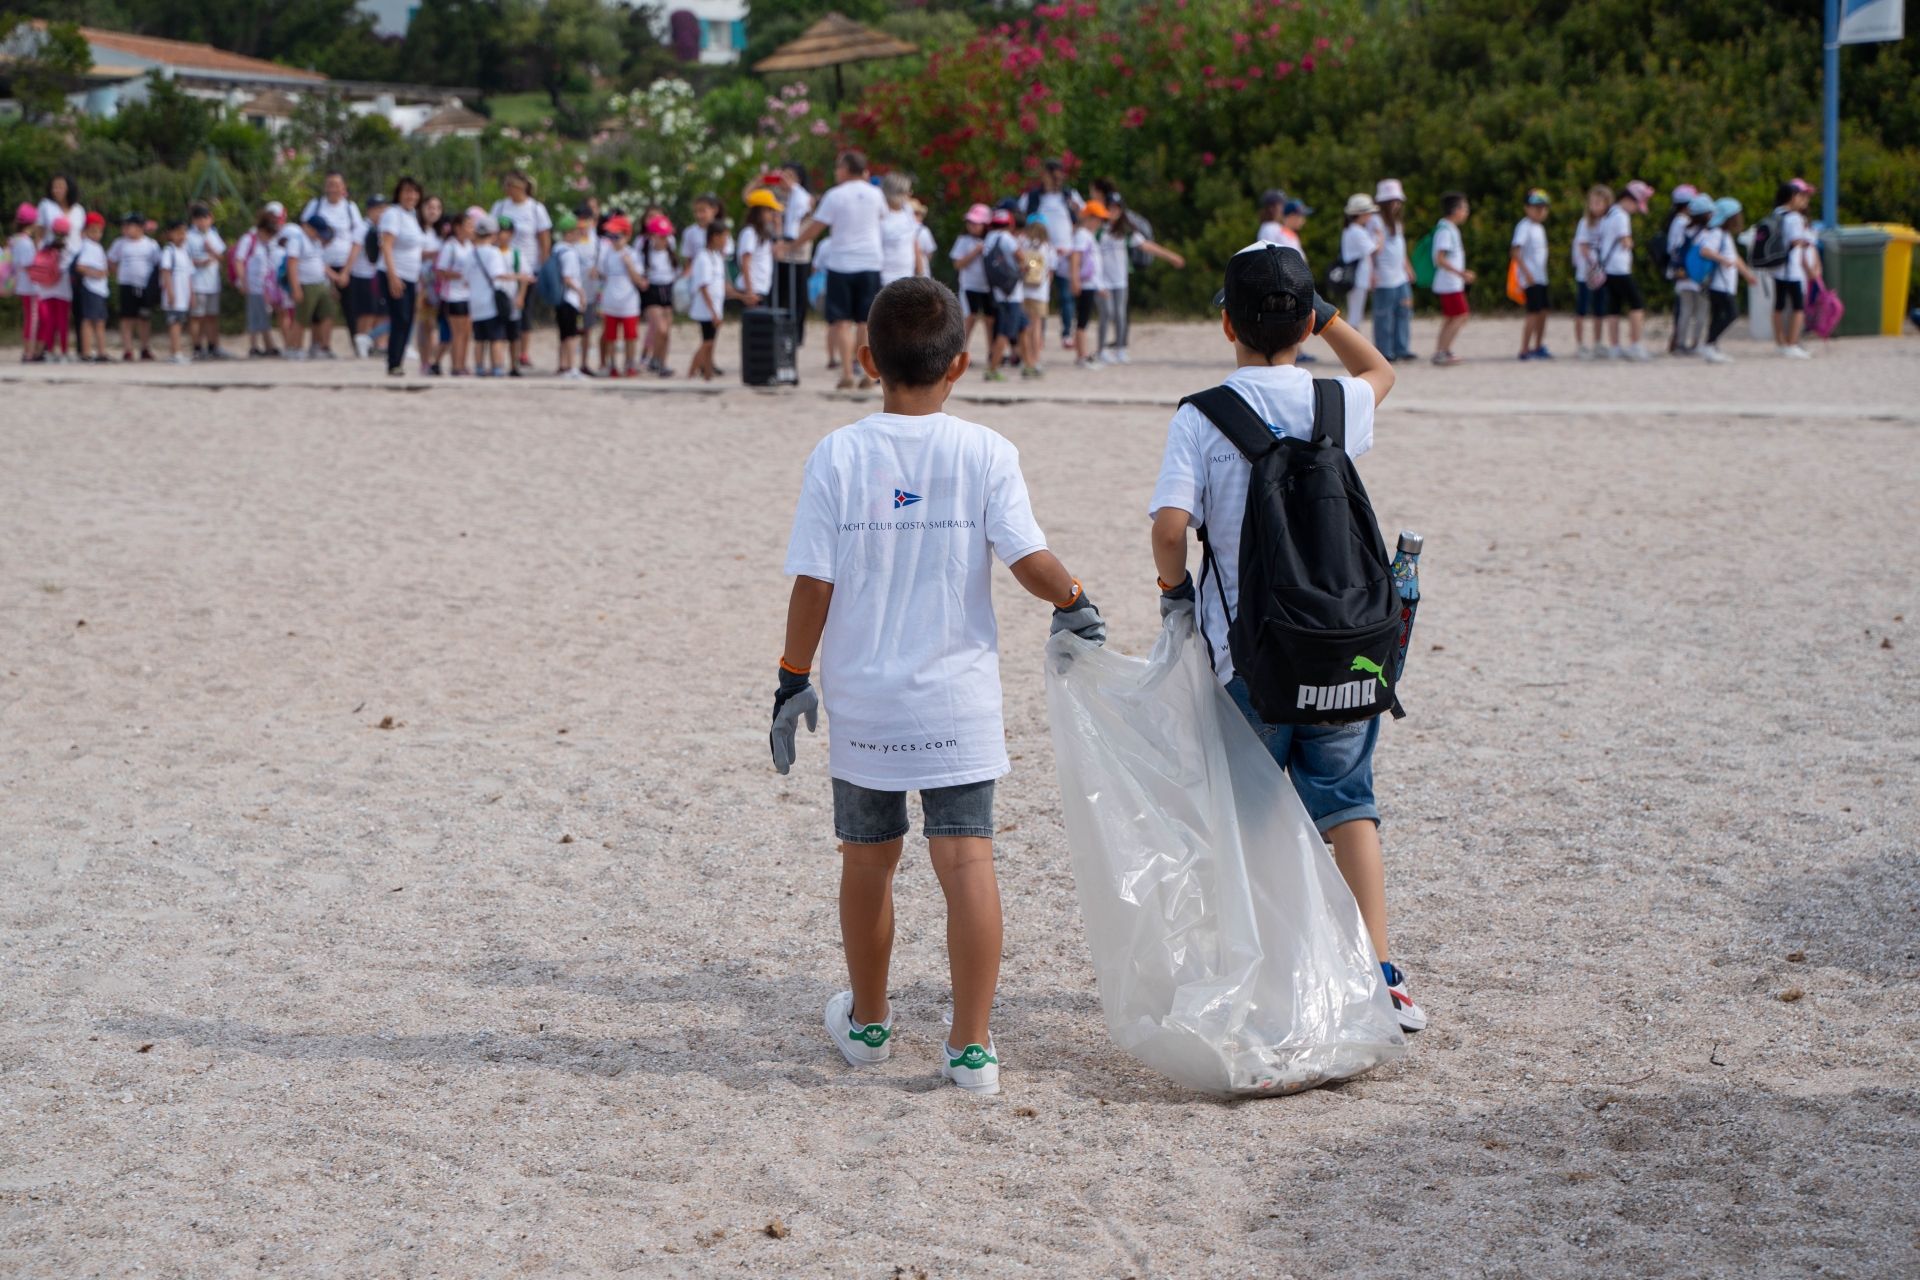 Over 160 People attend 6th Edition of  YCCS Clean Beach Day - News - Yacht Club Costa Smeralda